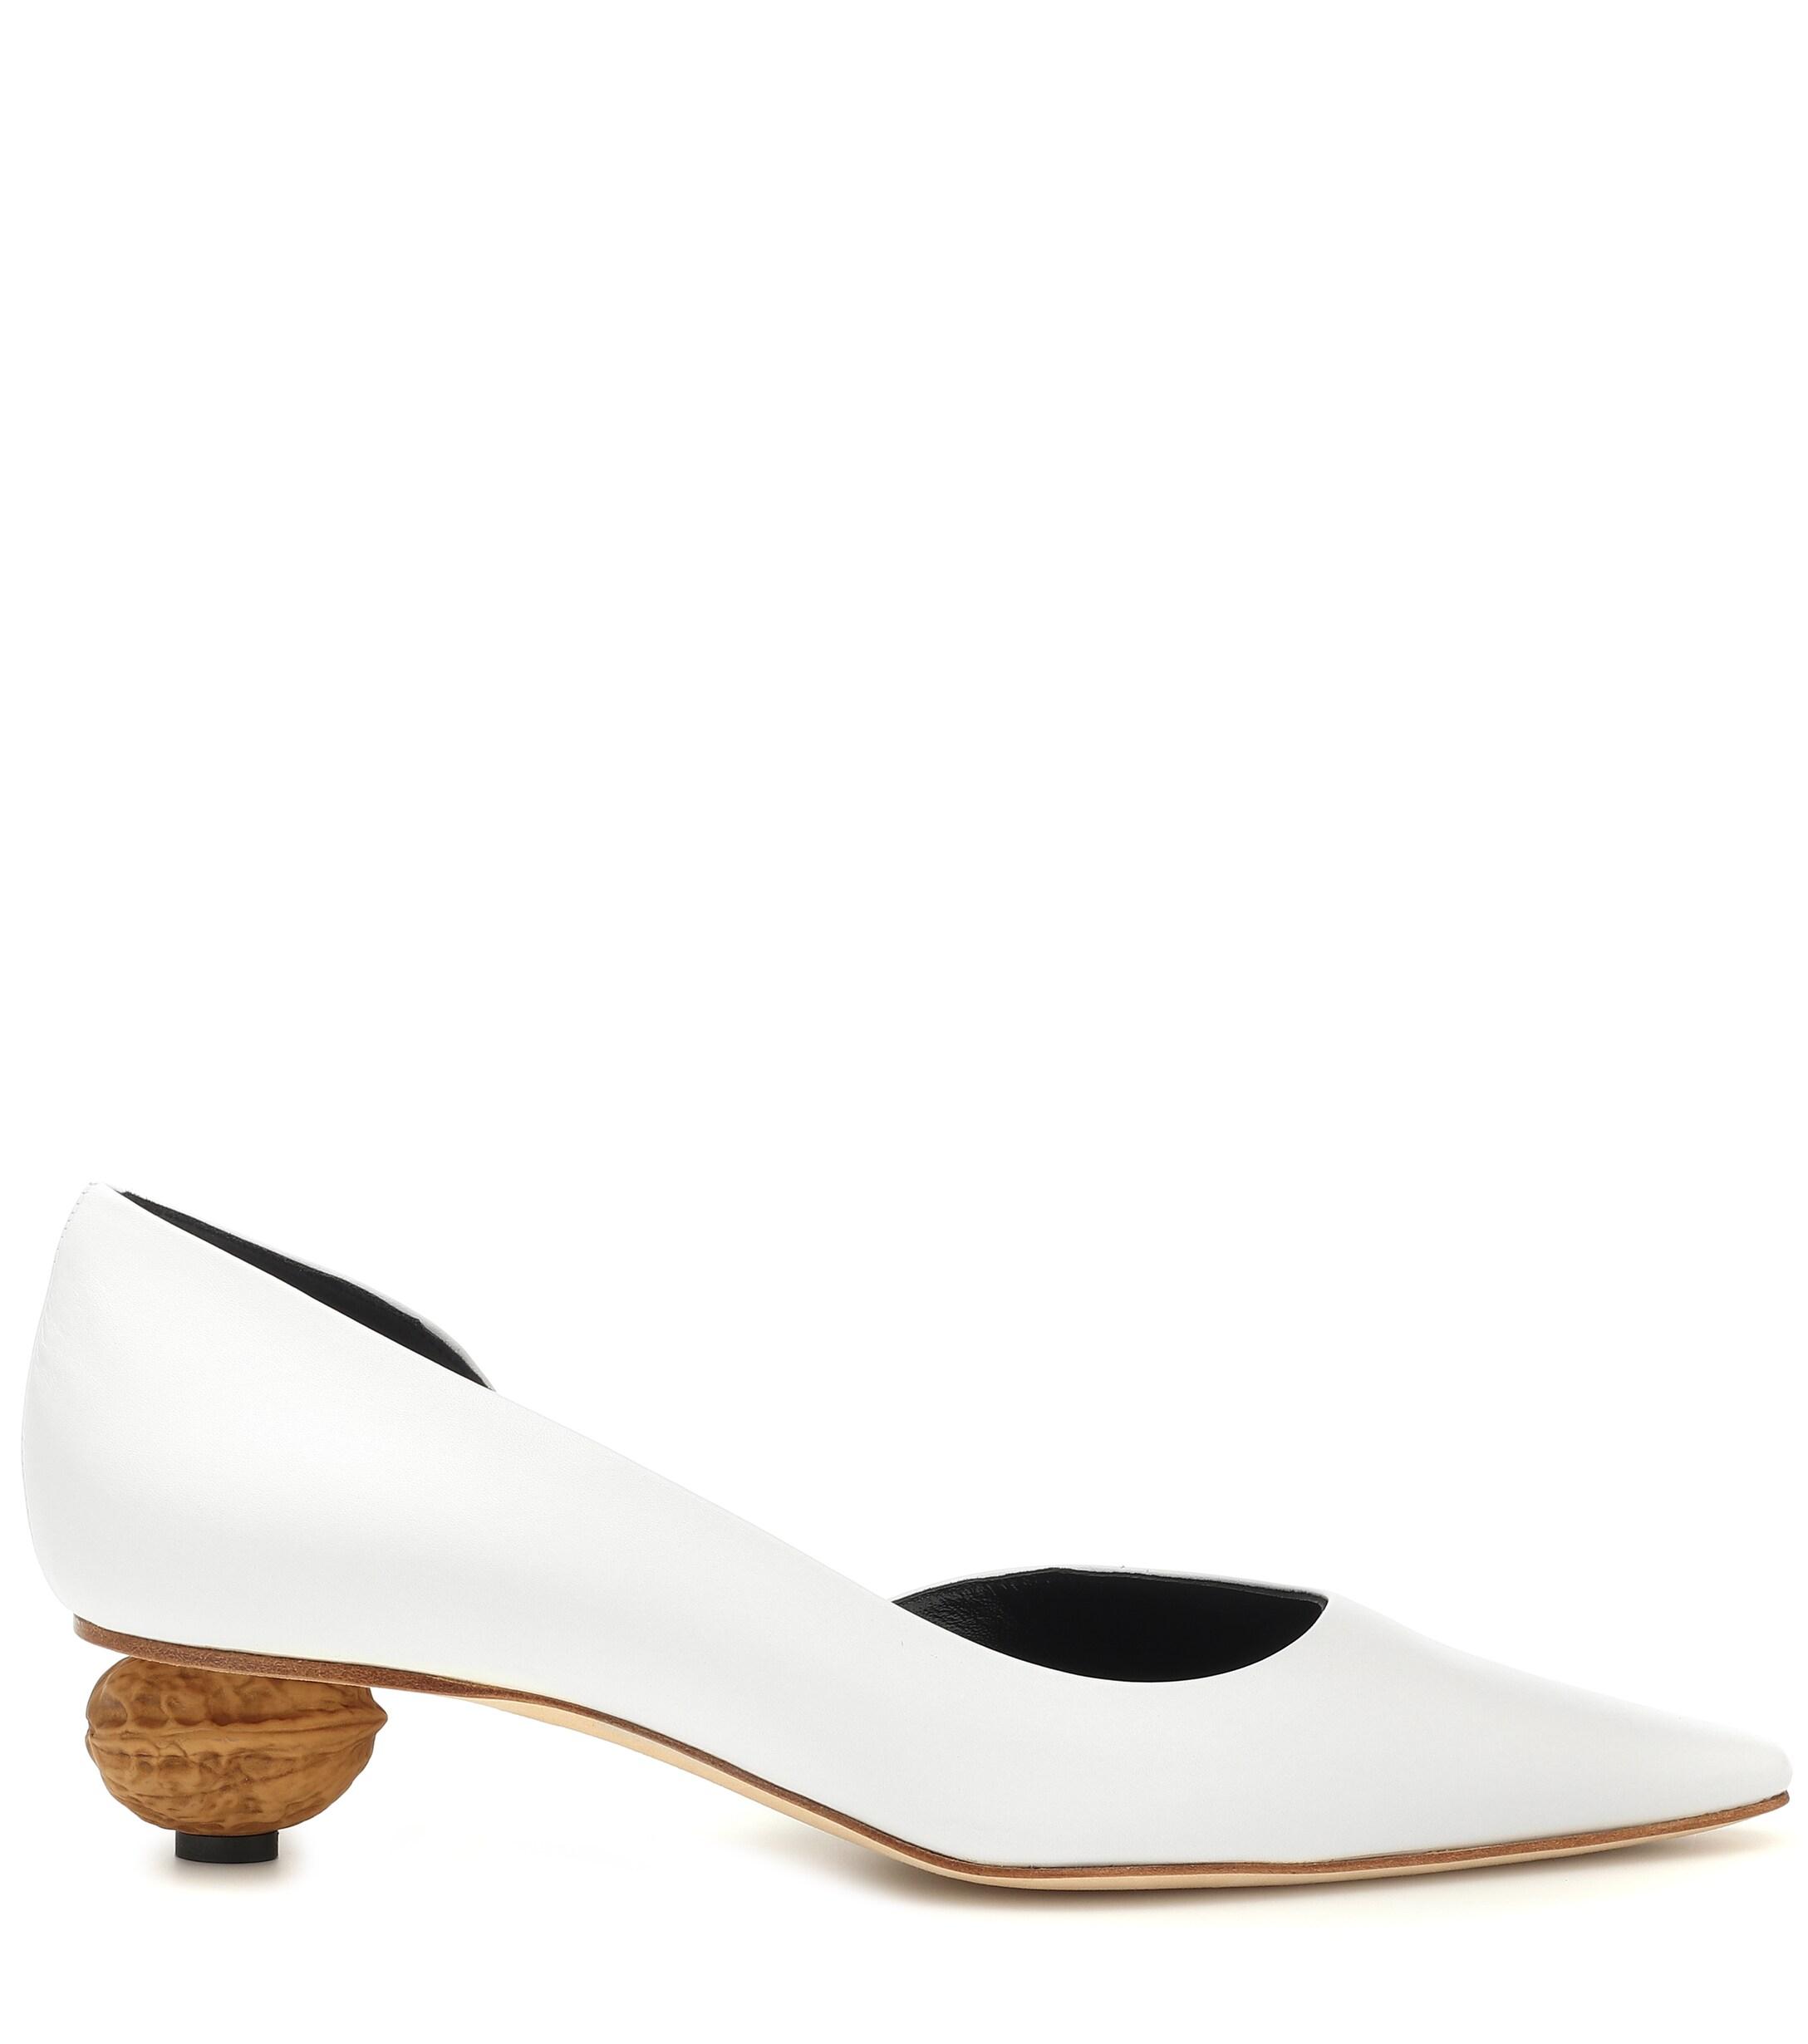 Loewe Leather Pumps in White,Natural (White) - Save 50% - Lyst